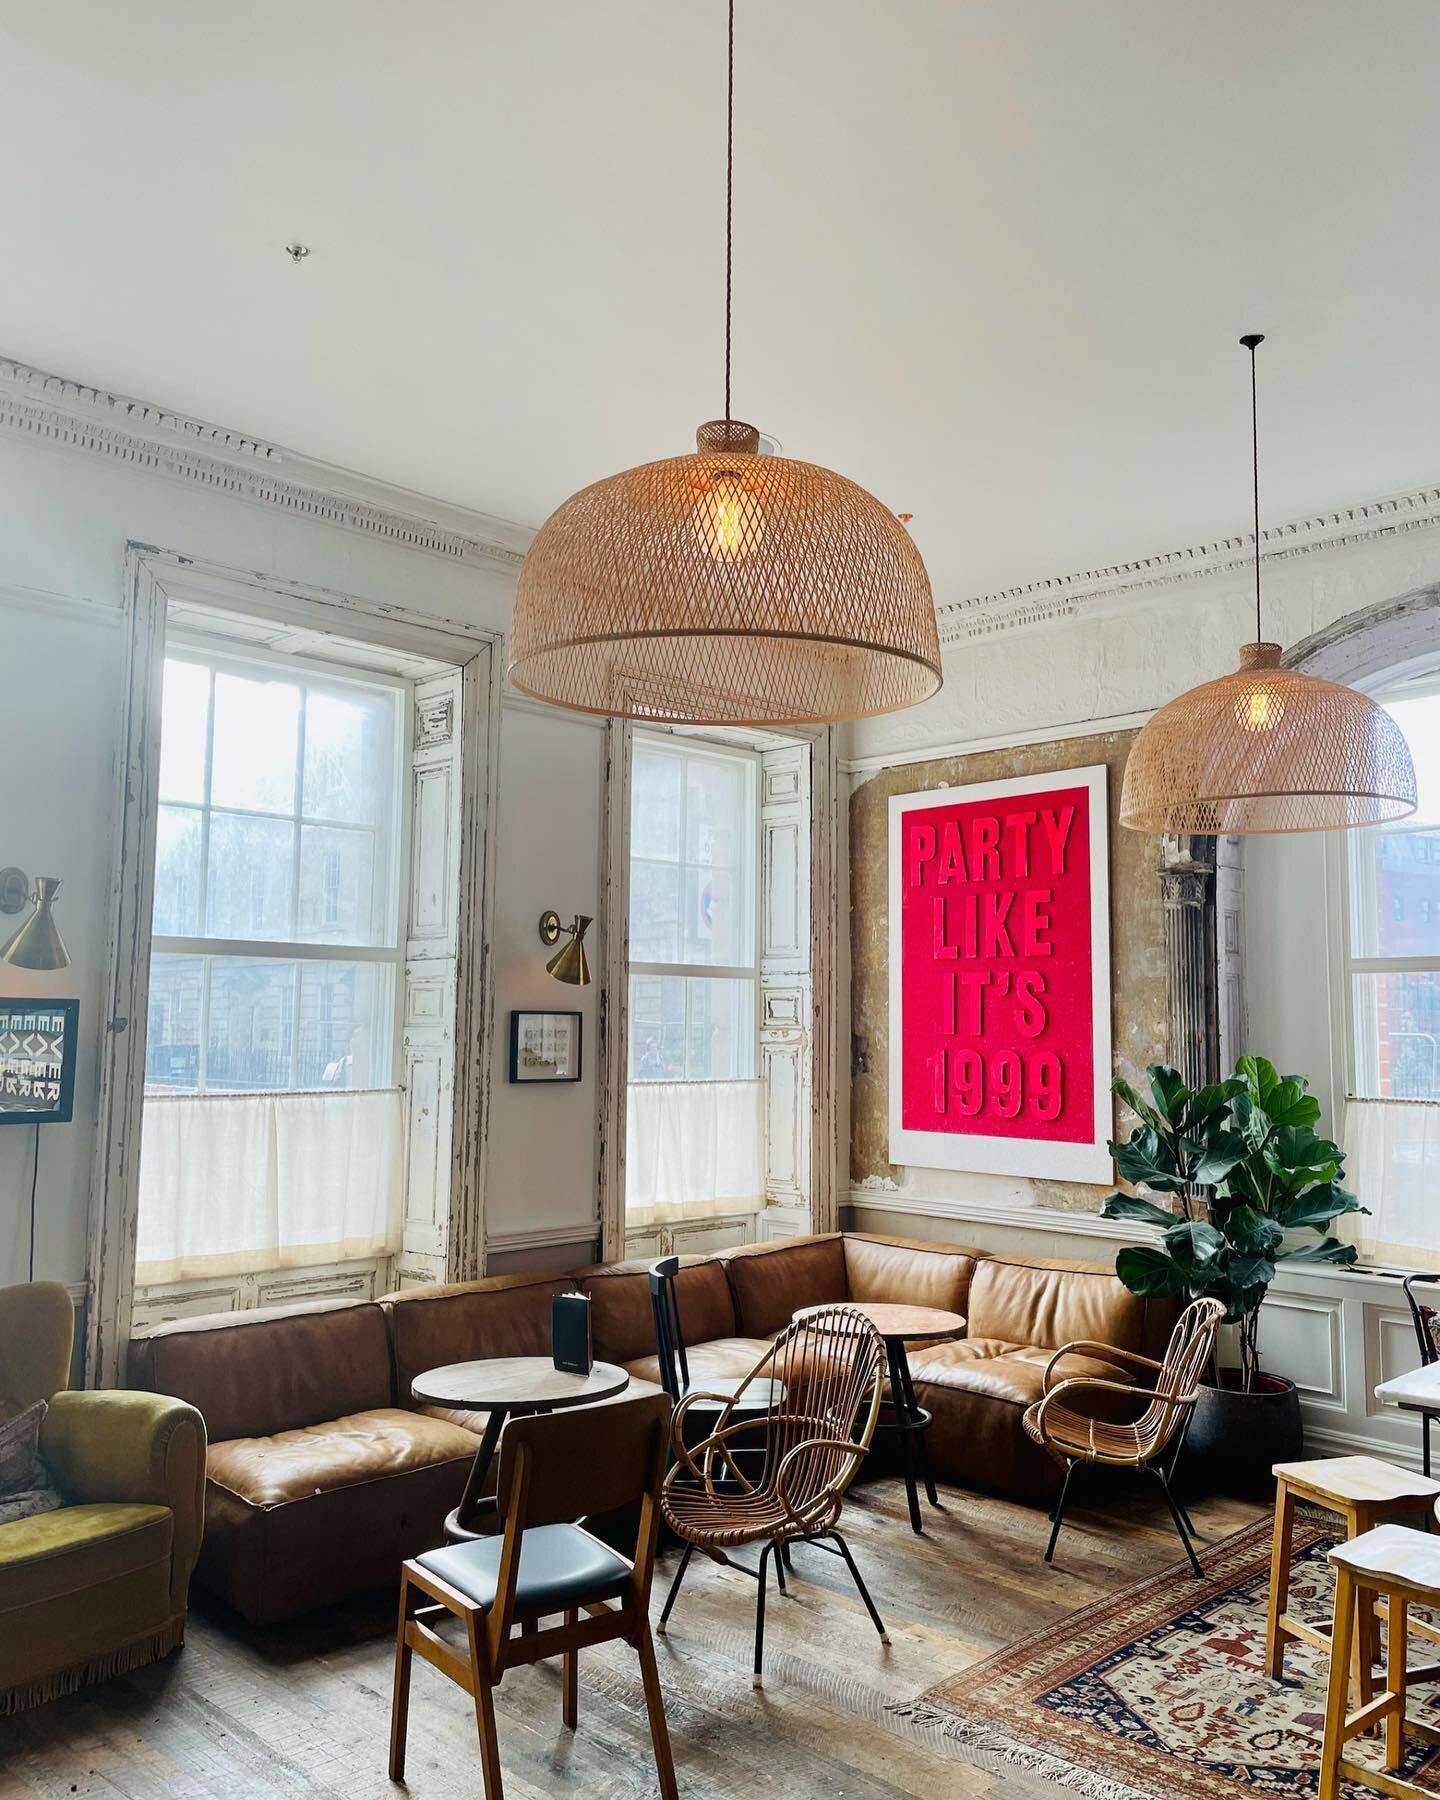 i n s p o . . .

is everything in my job. I&rsquo;m forever taking in ideas for colour, pattern, furniture, lighting &amp; detail wherever I go.

From the first time I saw images of @artistresidence hotels I was smitten. They are interiors which spea